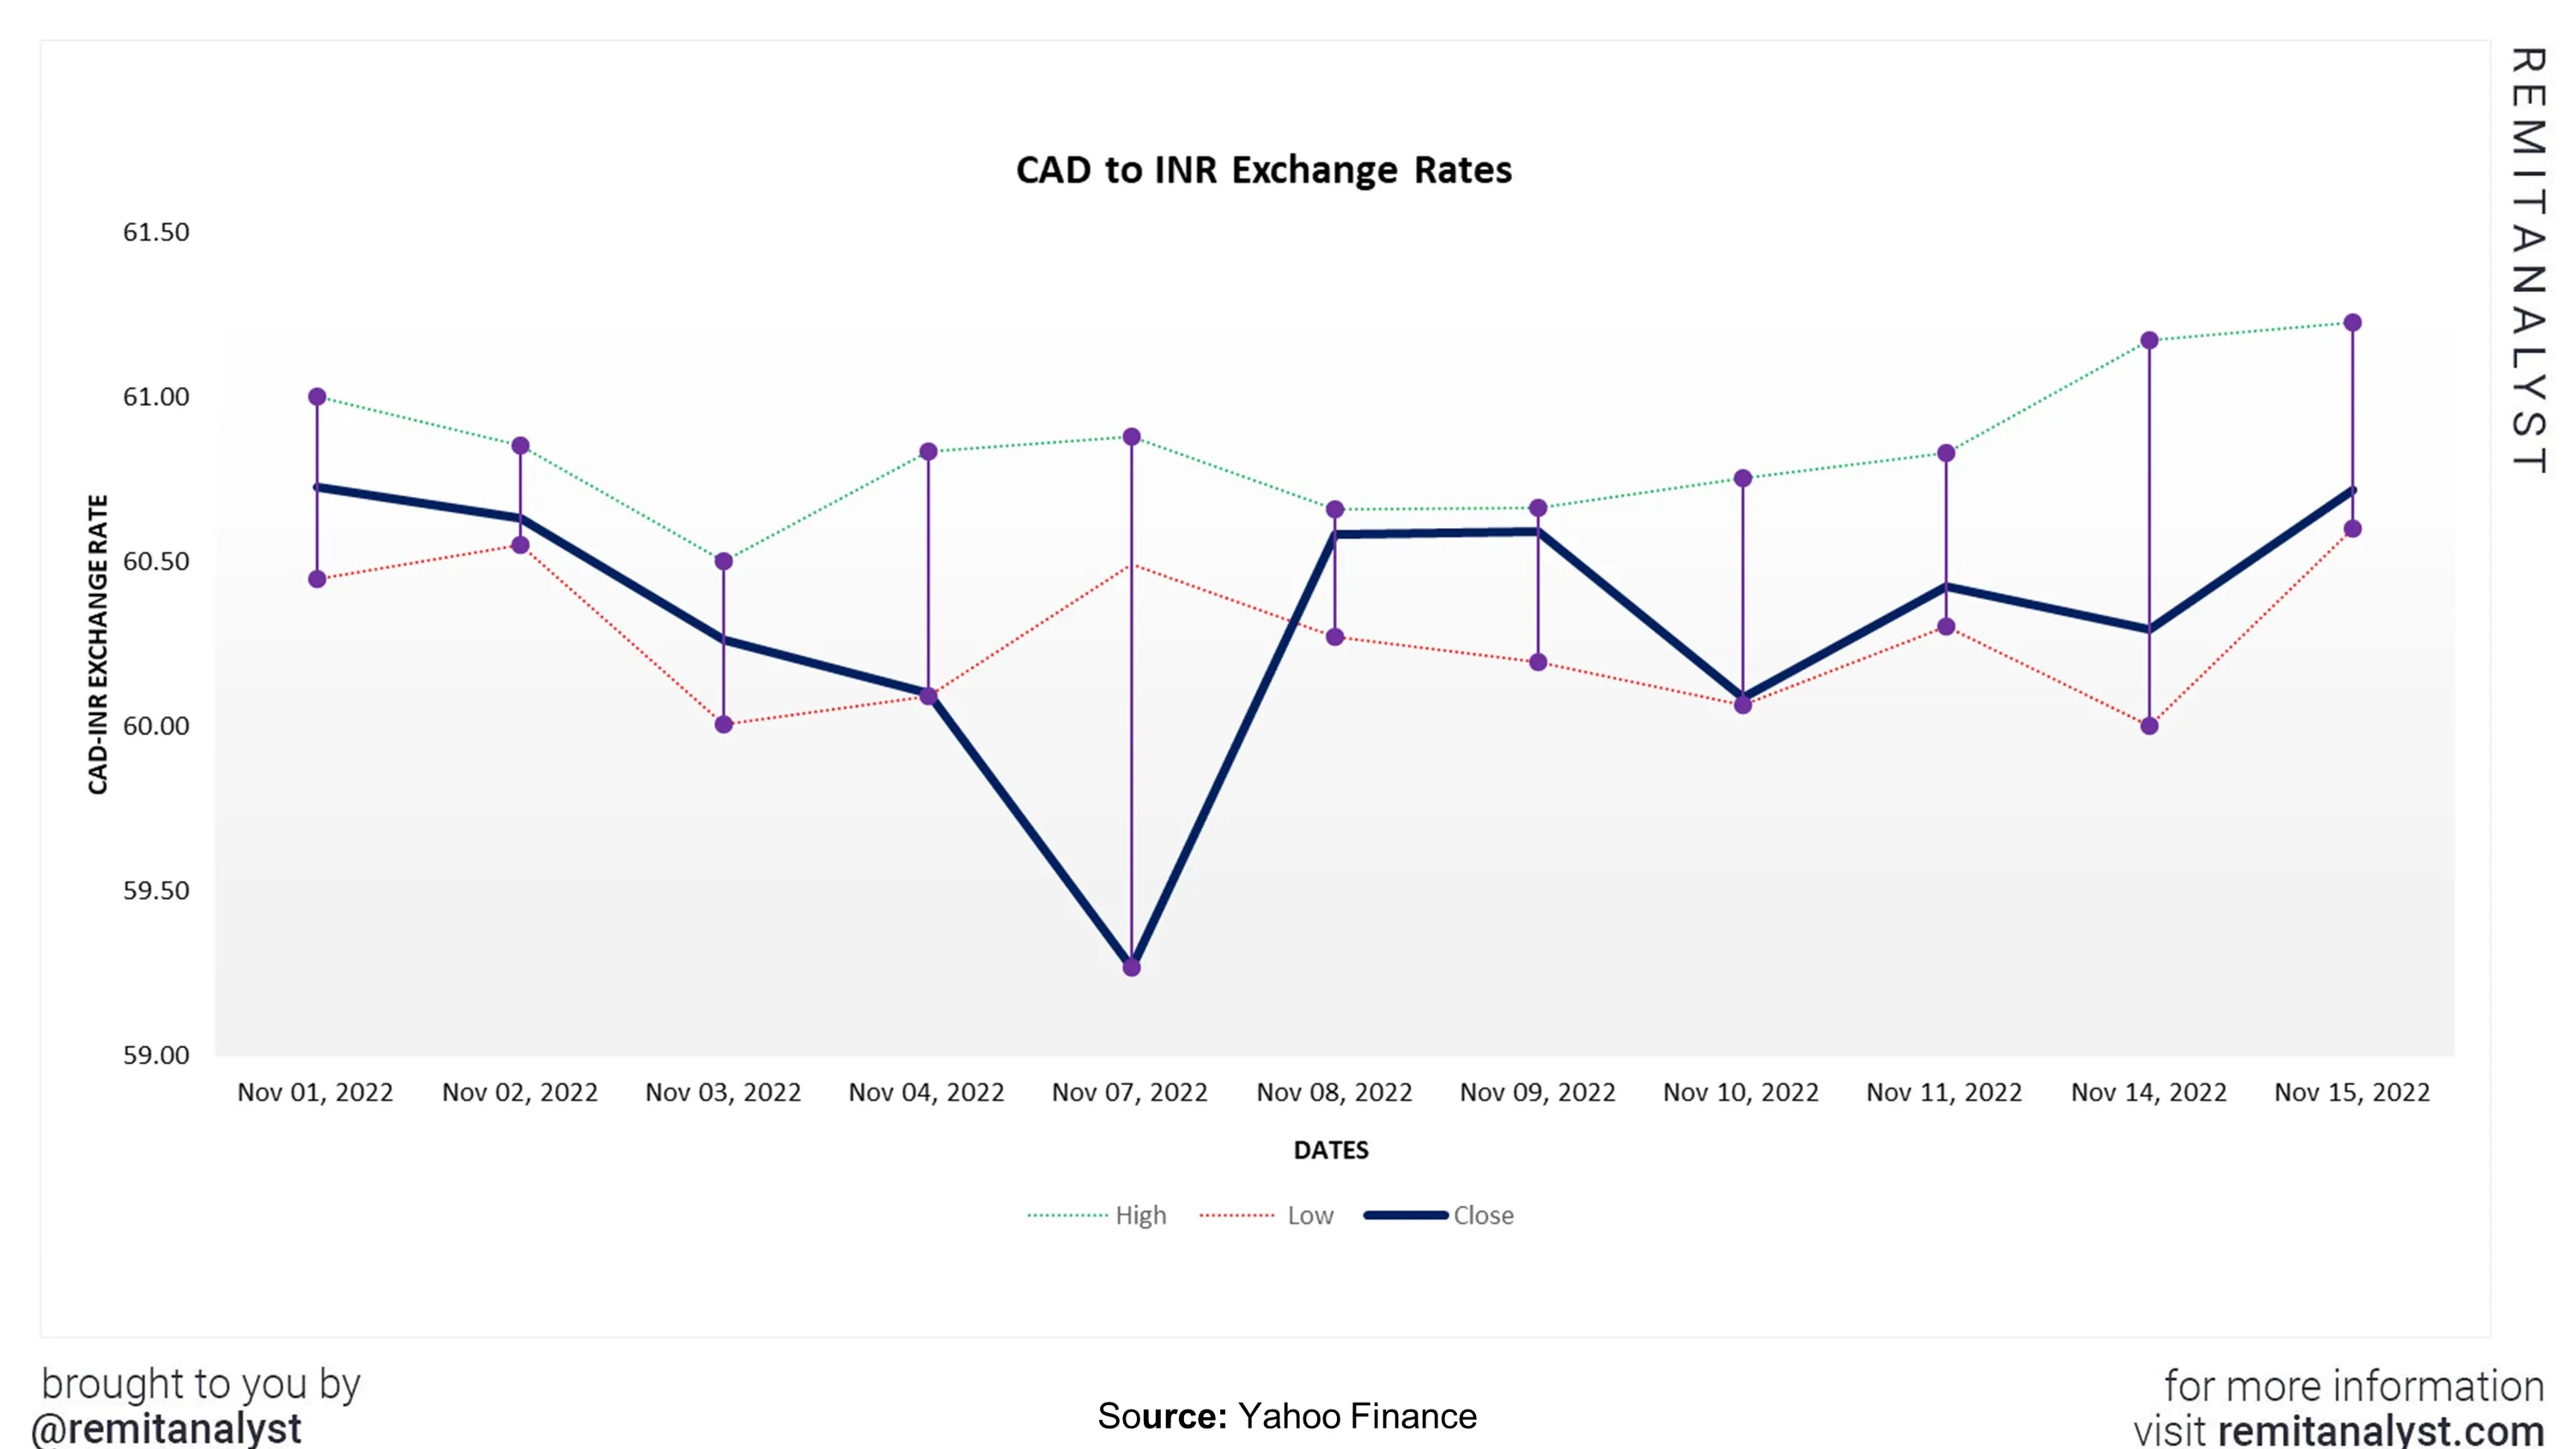 cad-to-inr-exchange-rate-from-1-nov-2022-to-15-nov-2022